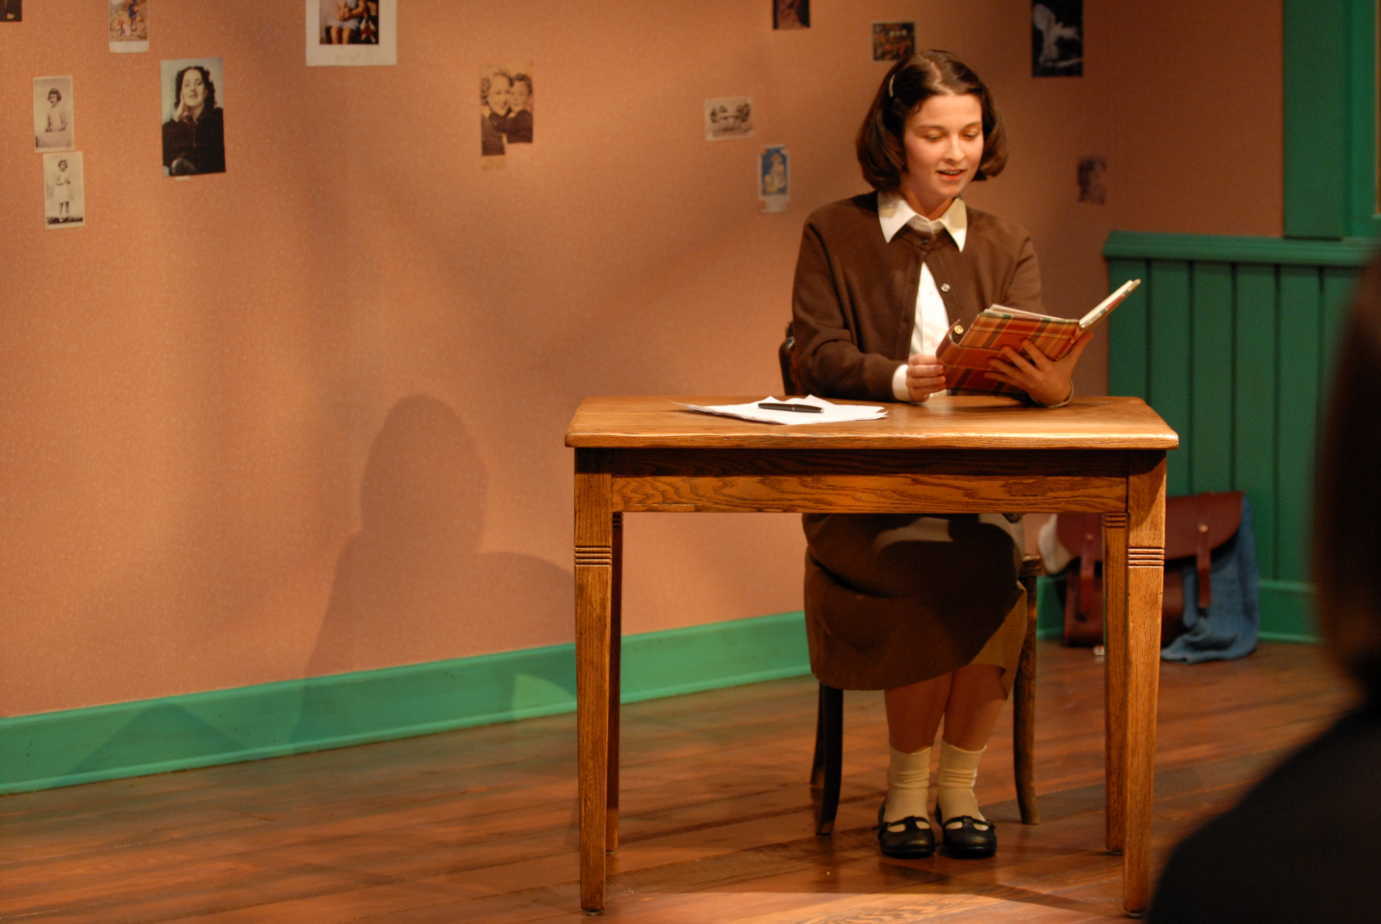 *The Power of Children* is an immersive experience that includes theater production in the exhibits. Here, Anne Frank reads from her diary.  Image courtesy of the Children's Museum of Indianapolis.